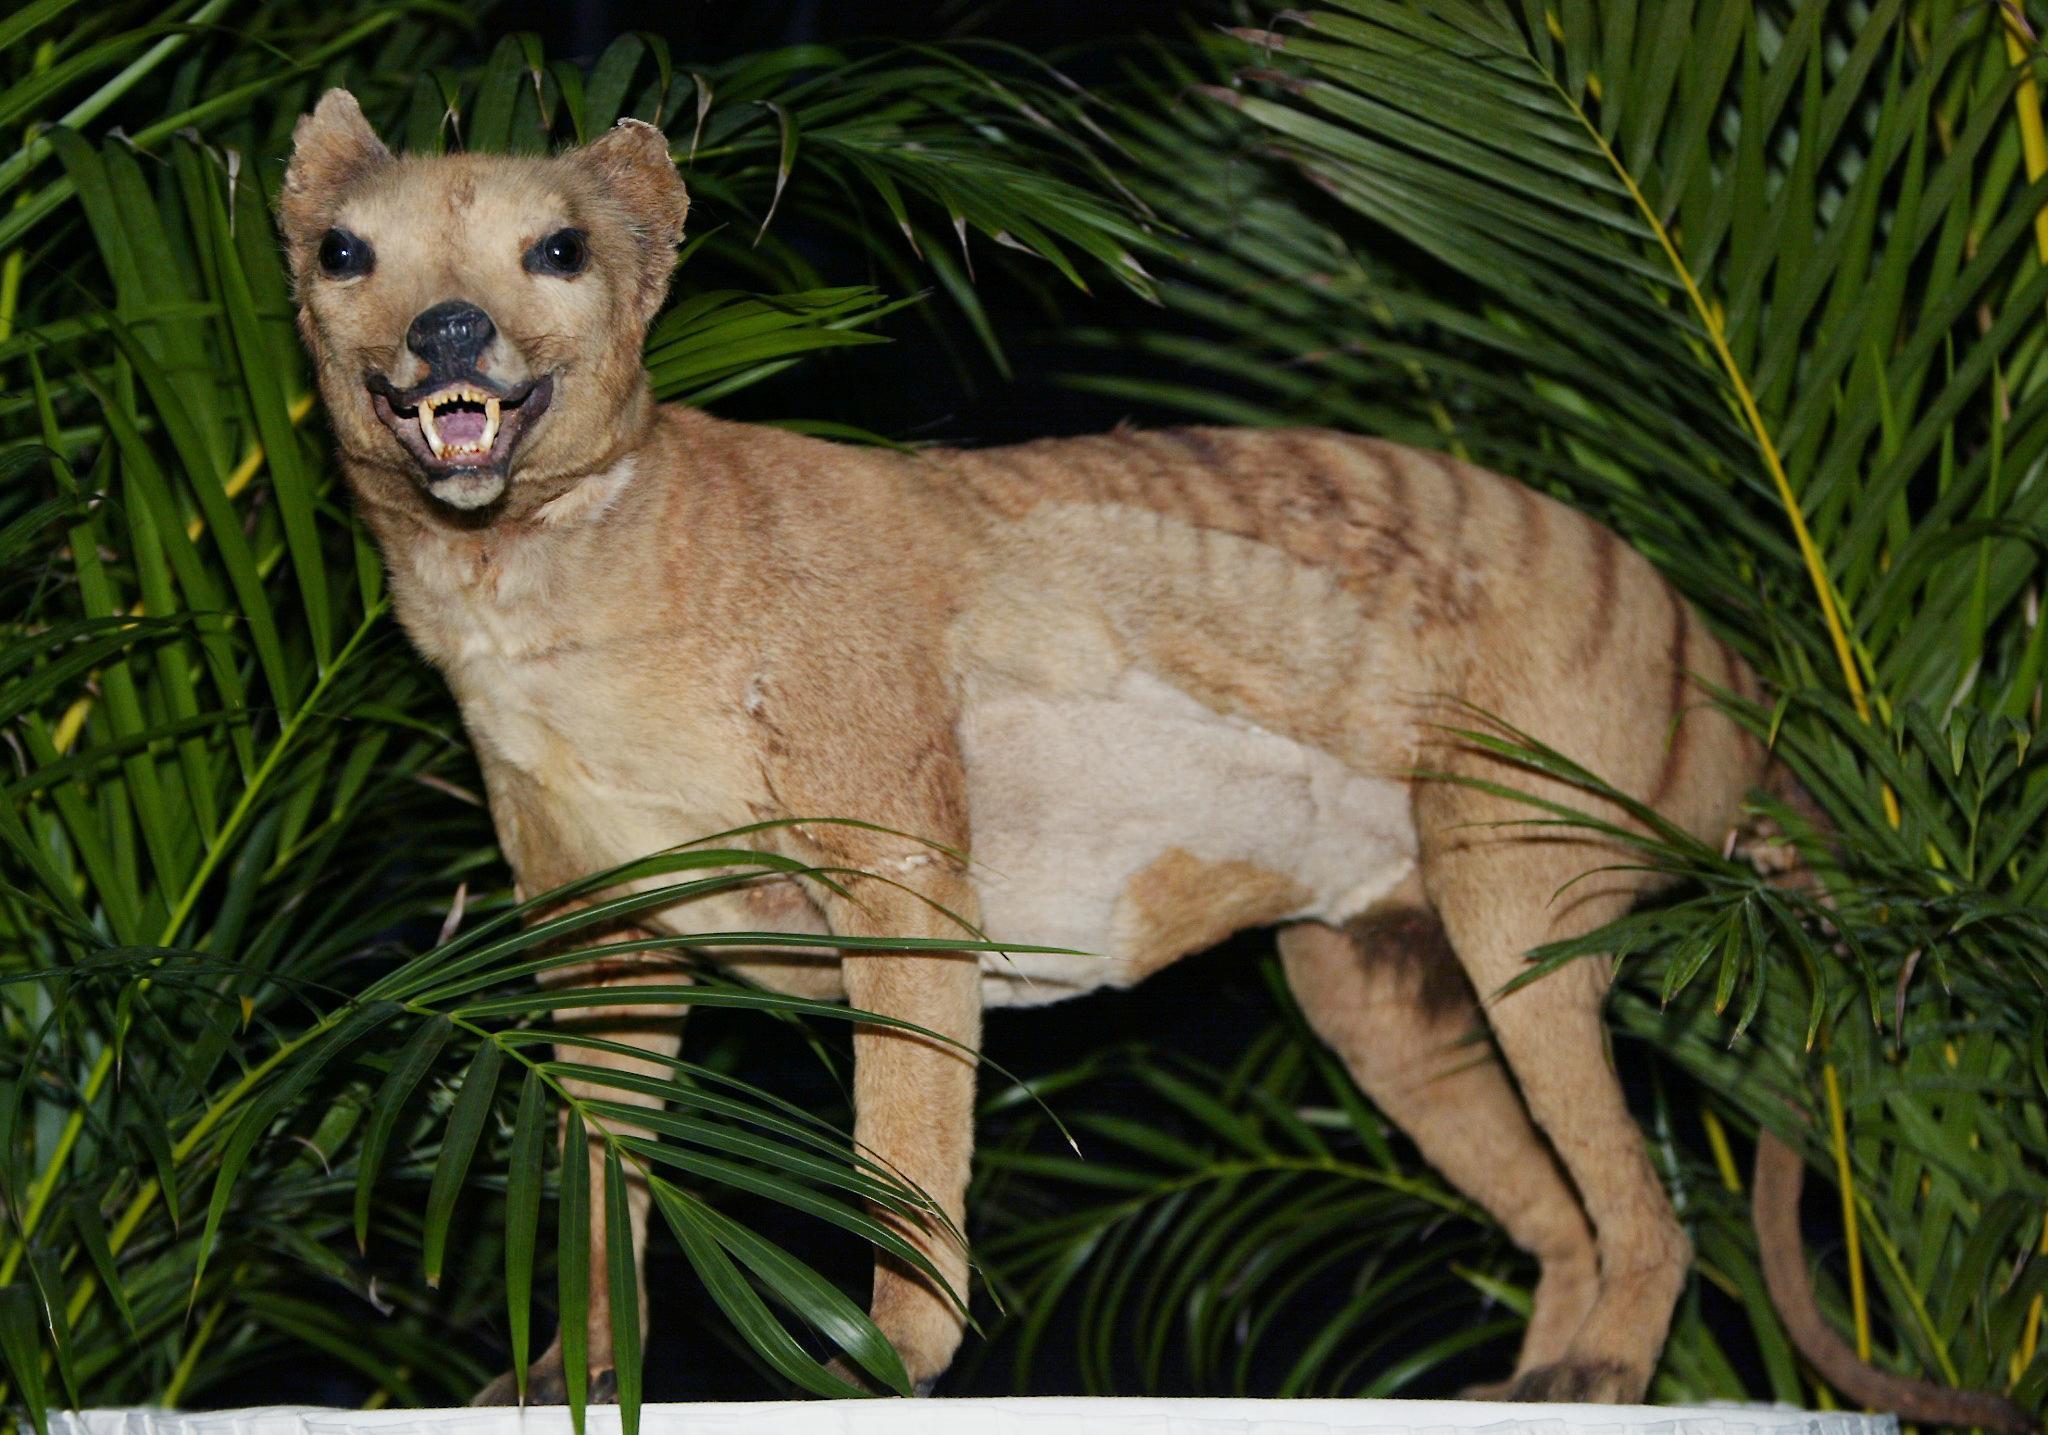 A tan animal that looks like a dog with faint stripes on its rump, with teeth bared, stands amid greenery.